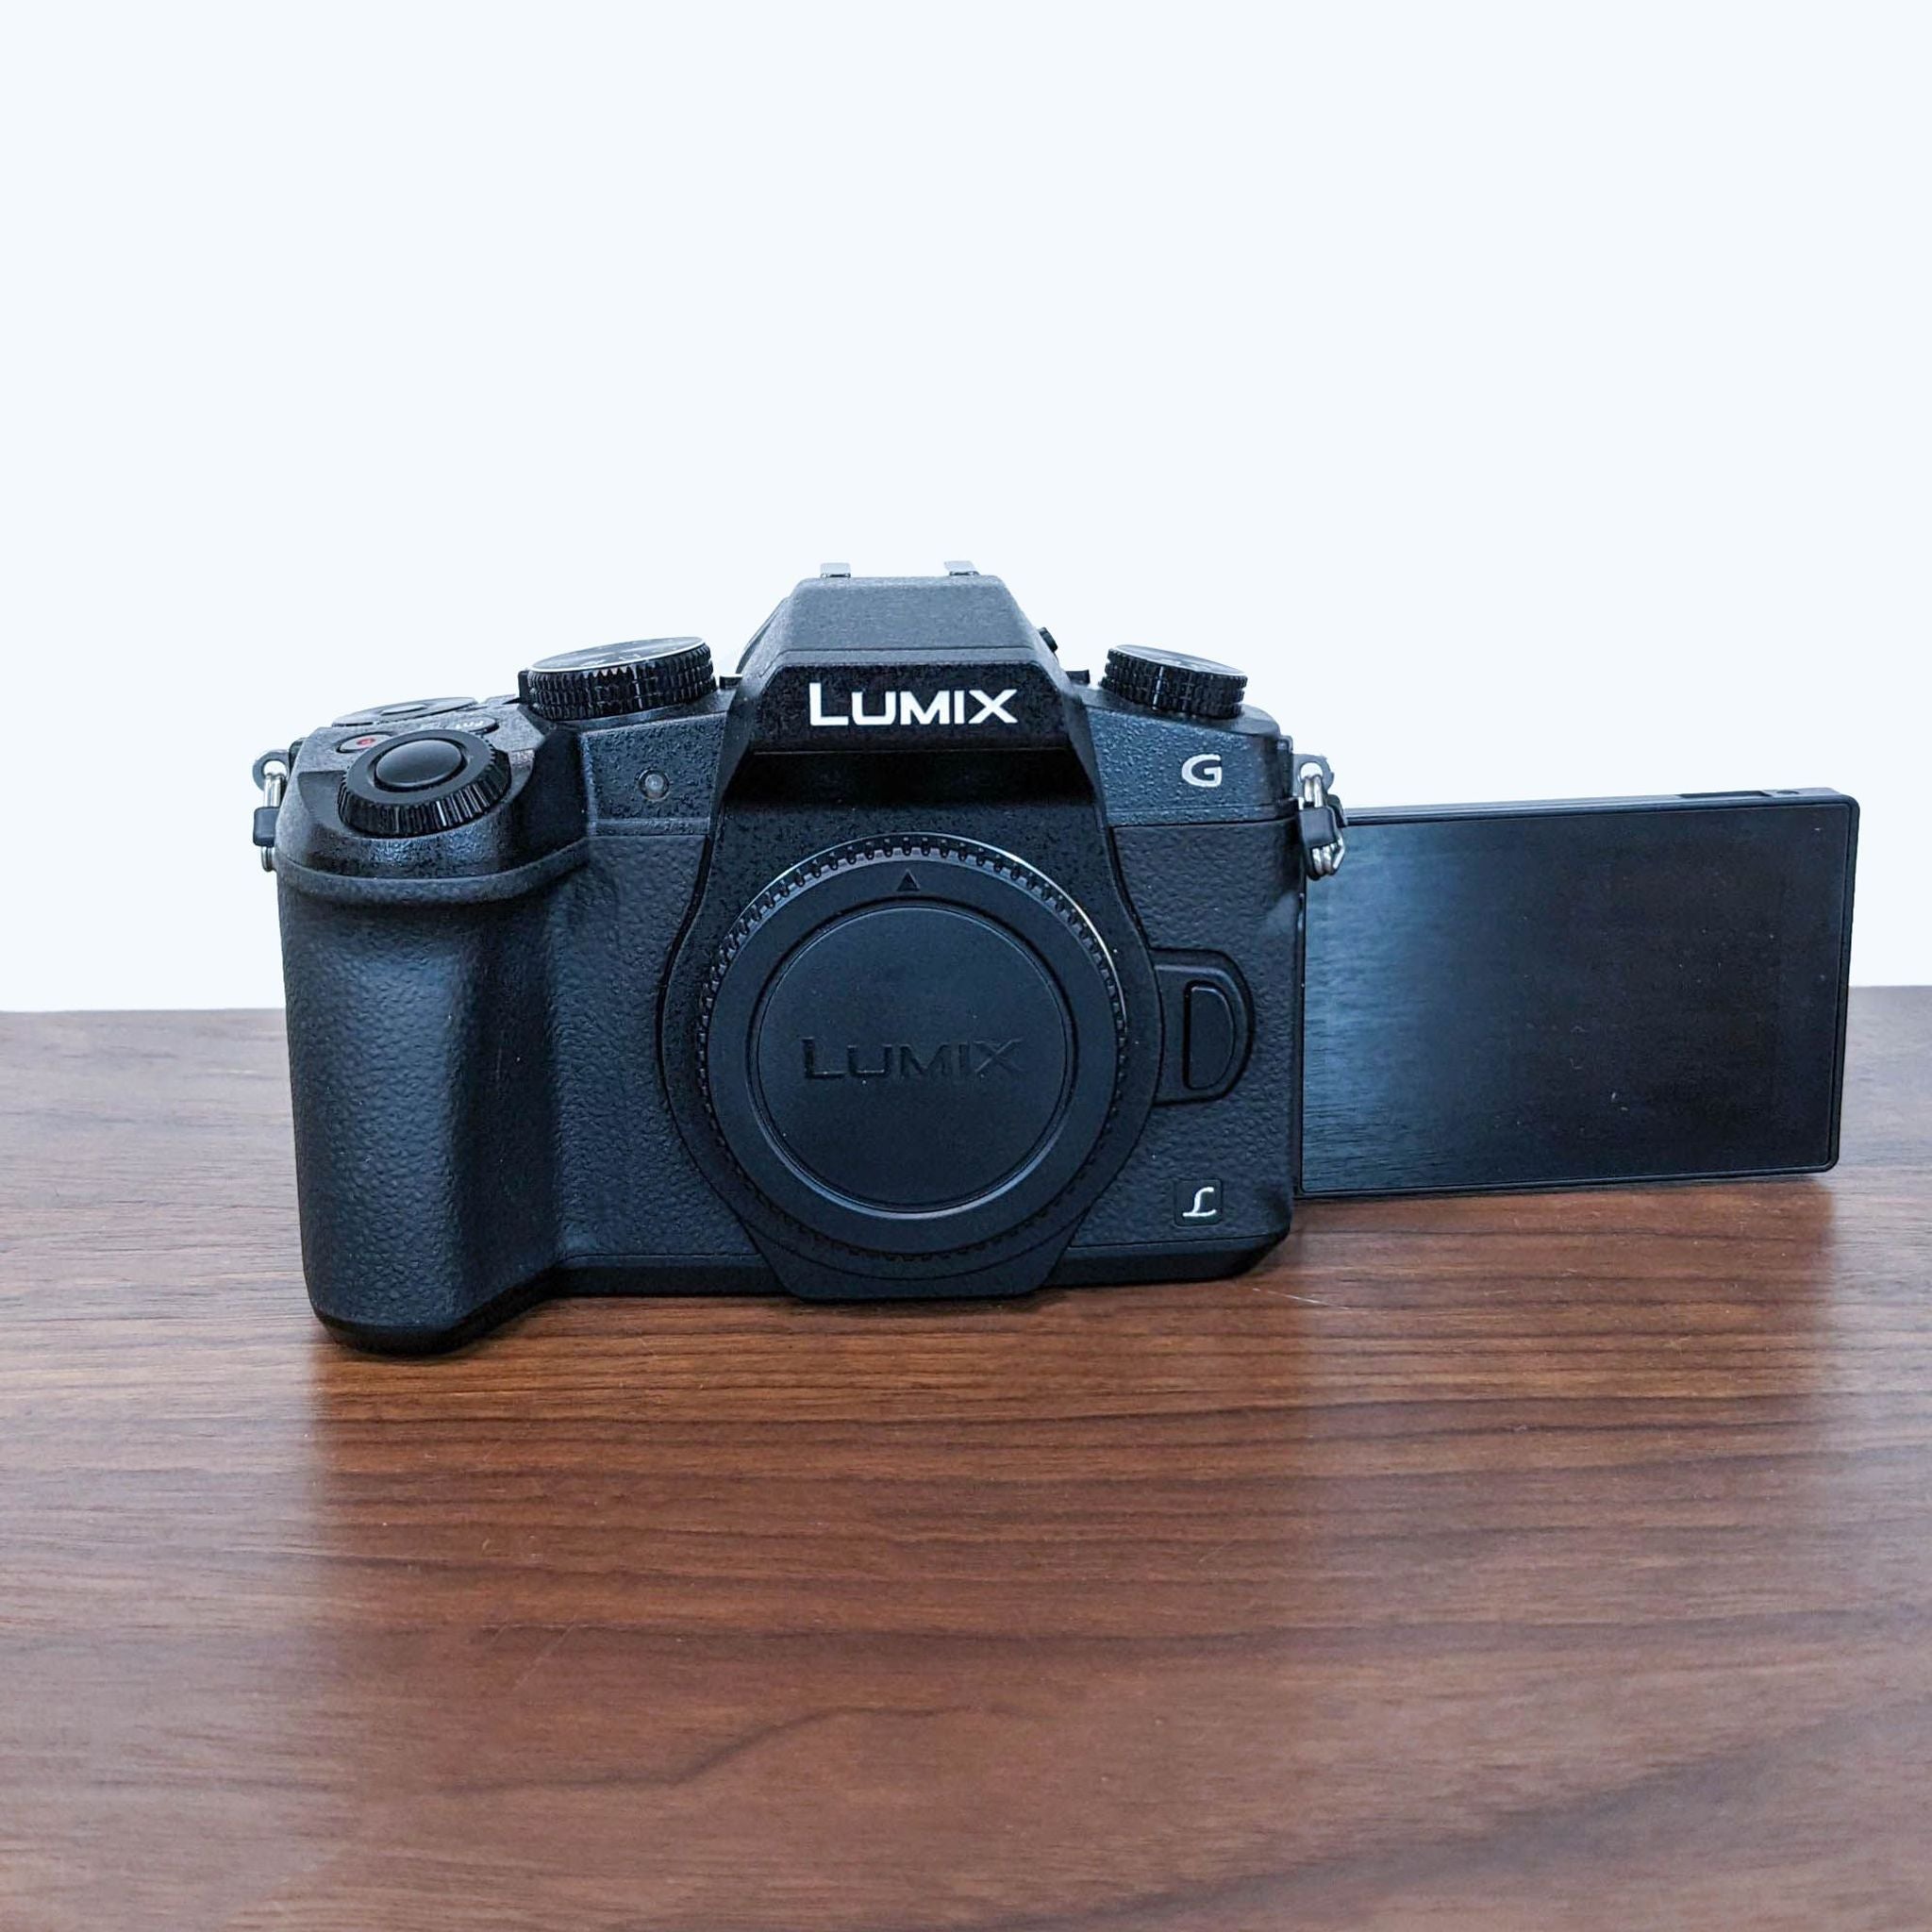 3. Side view of the LUMIX G Mirrorless Camera with a fully articulated screen extended to the side against a wooden background.